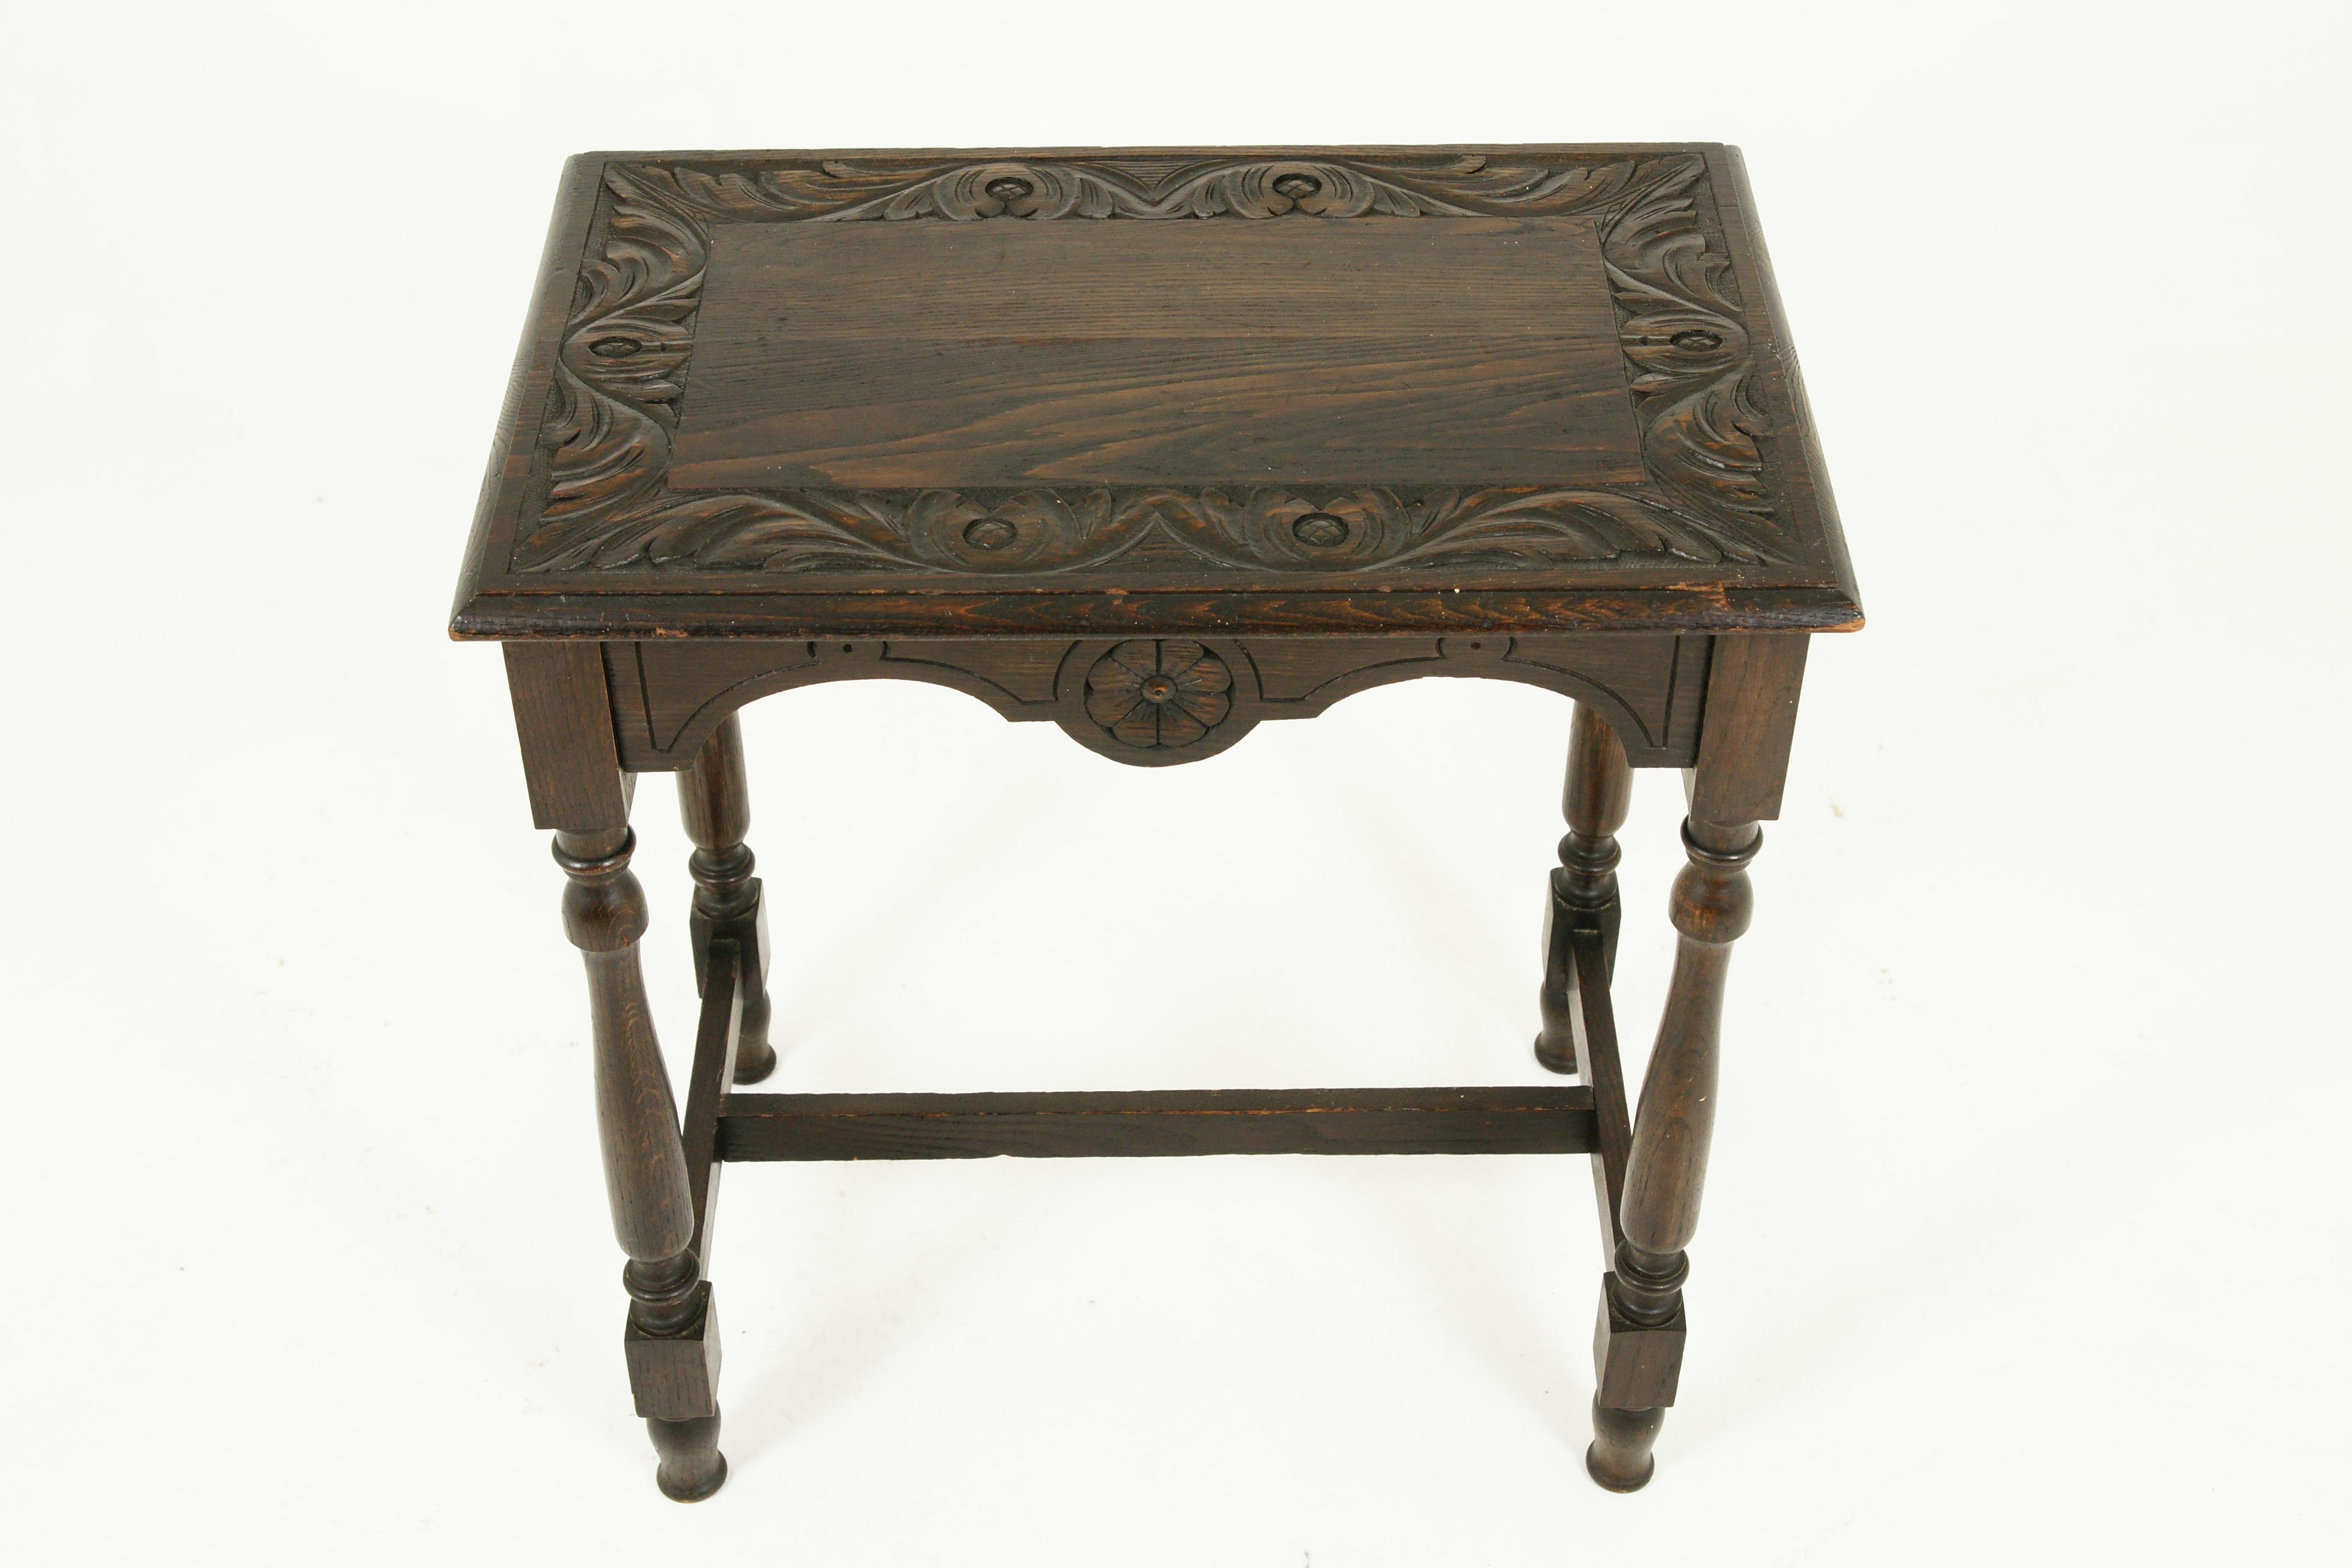 Scottish Antique Victorian Gothic Carved Oak Side Table, Lamp Table, Scotland 1880, B2443